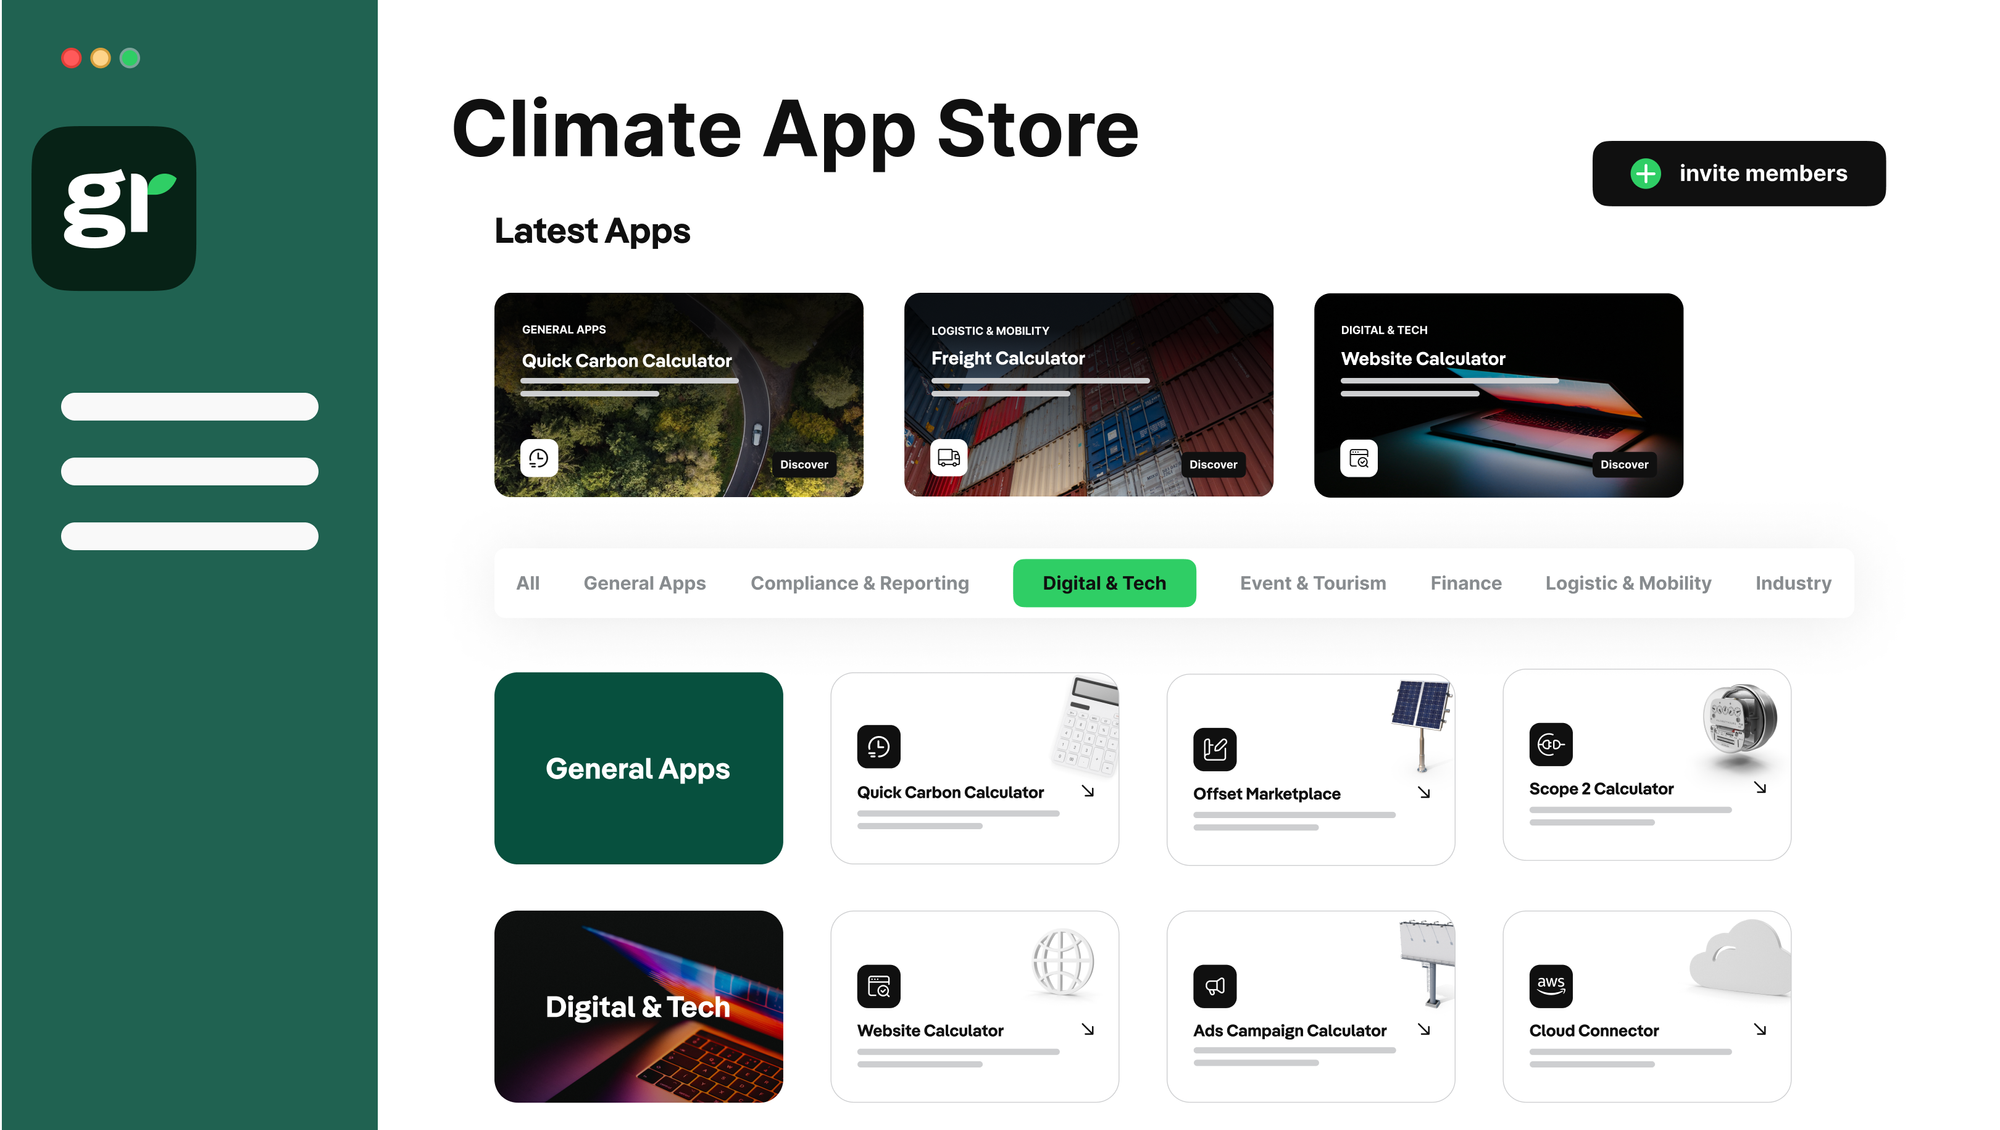 Greenly Climate App Store page with a featured section of Latest Apps including a Quick Carbon Calculator, Freight Calculator, and Website Calculator. Below that are different categories of apps.